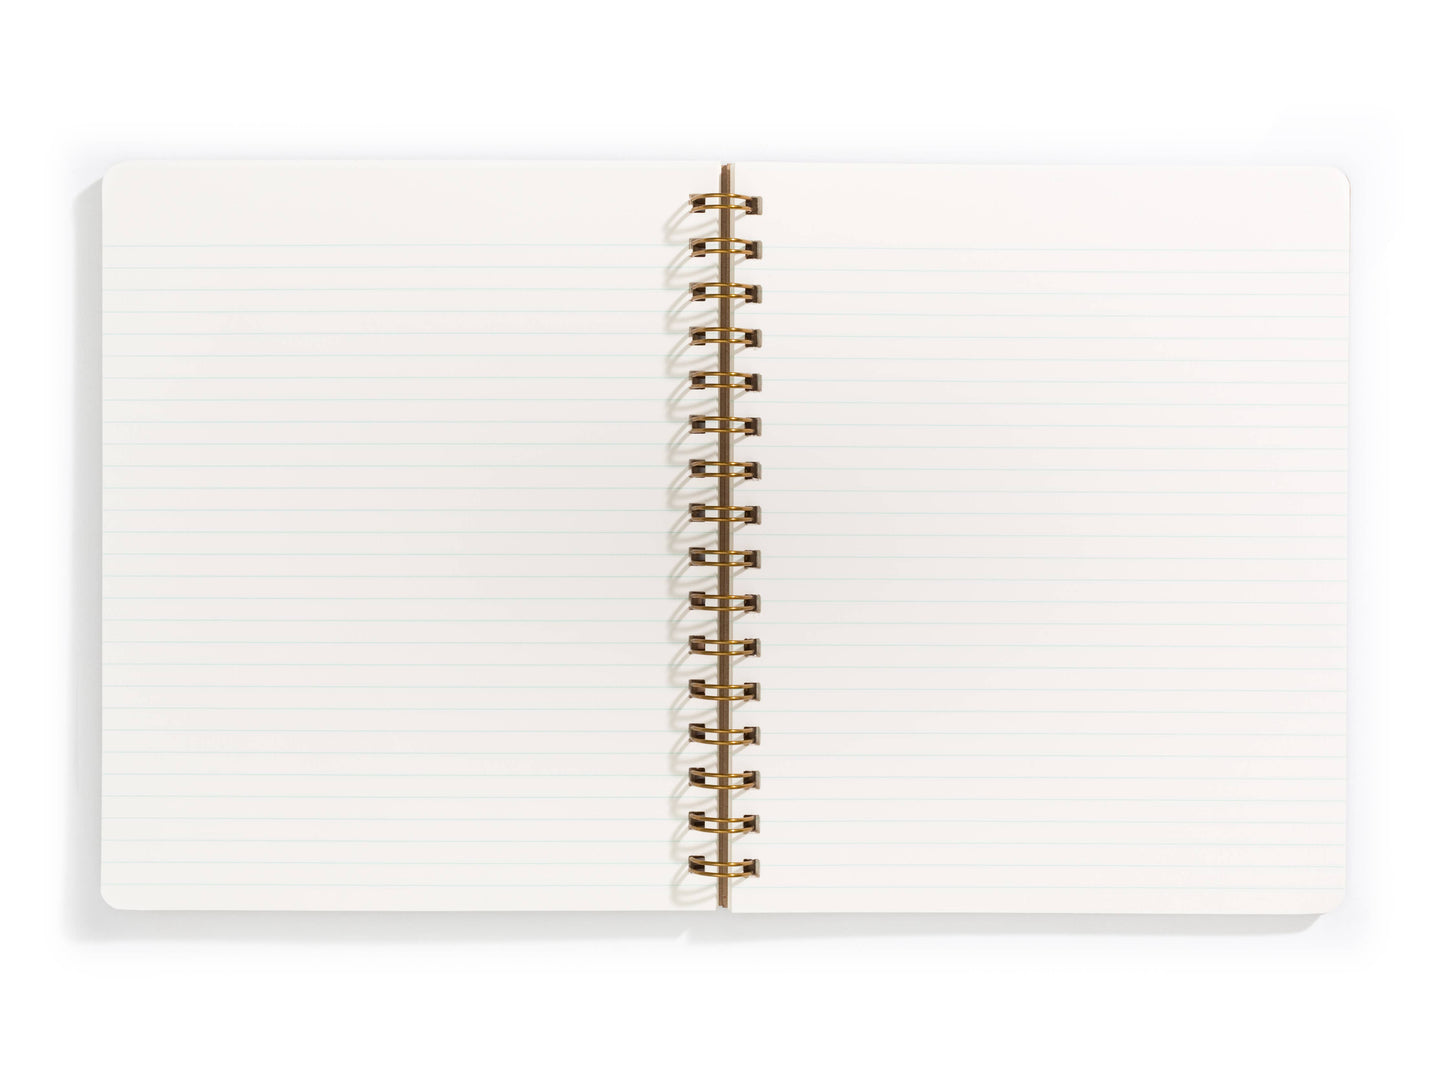 Lefty Standard Notebook - Solid Color Cover: Lilac